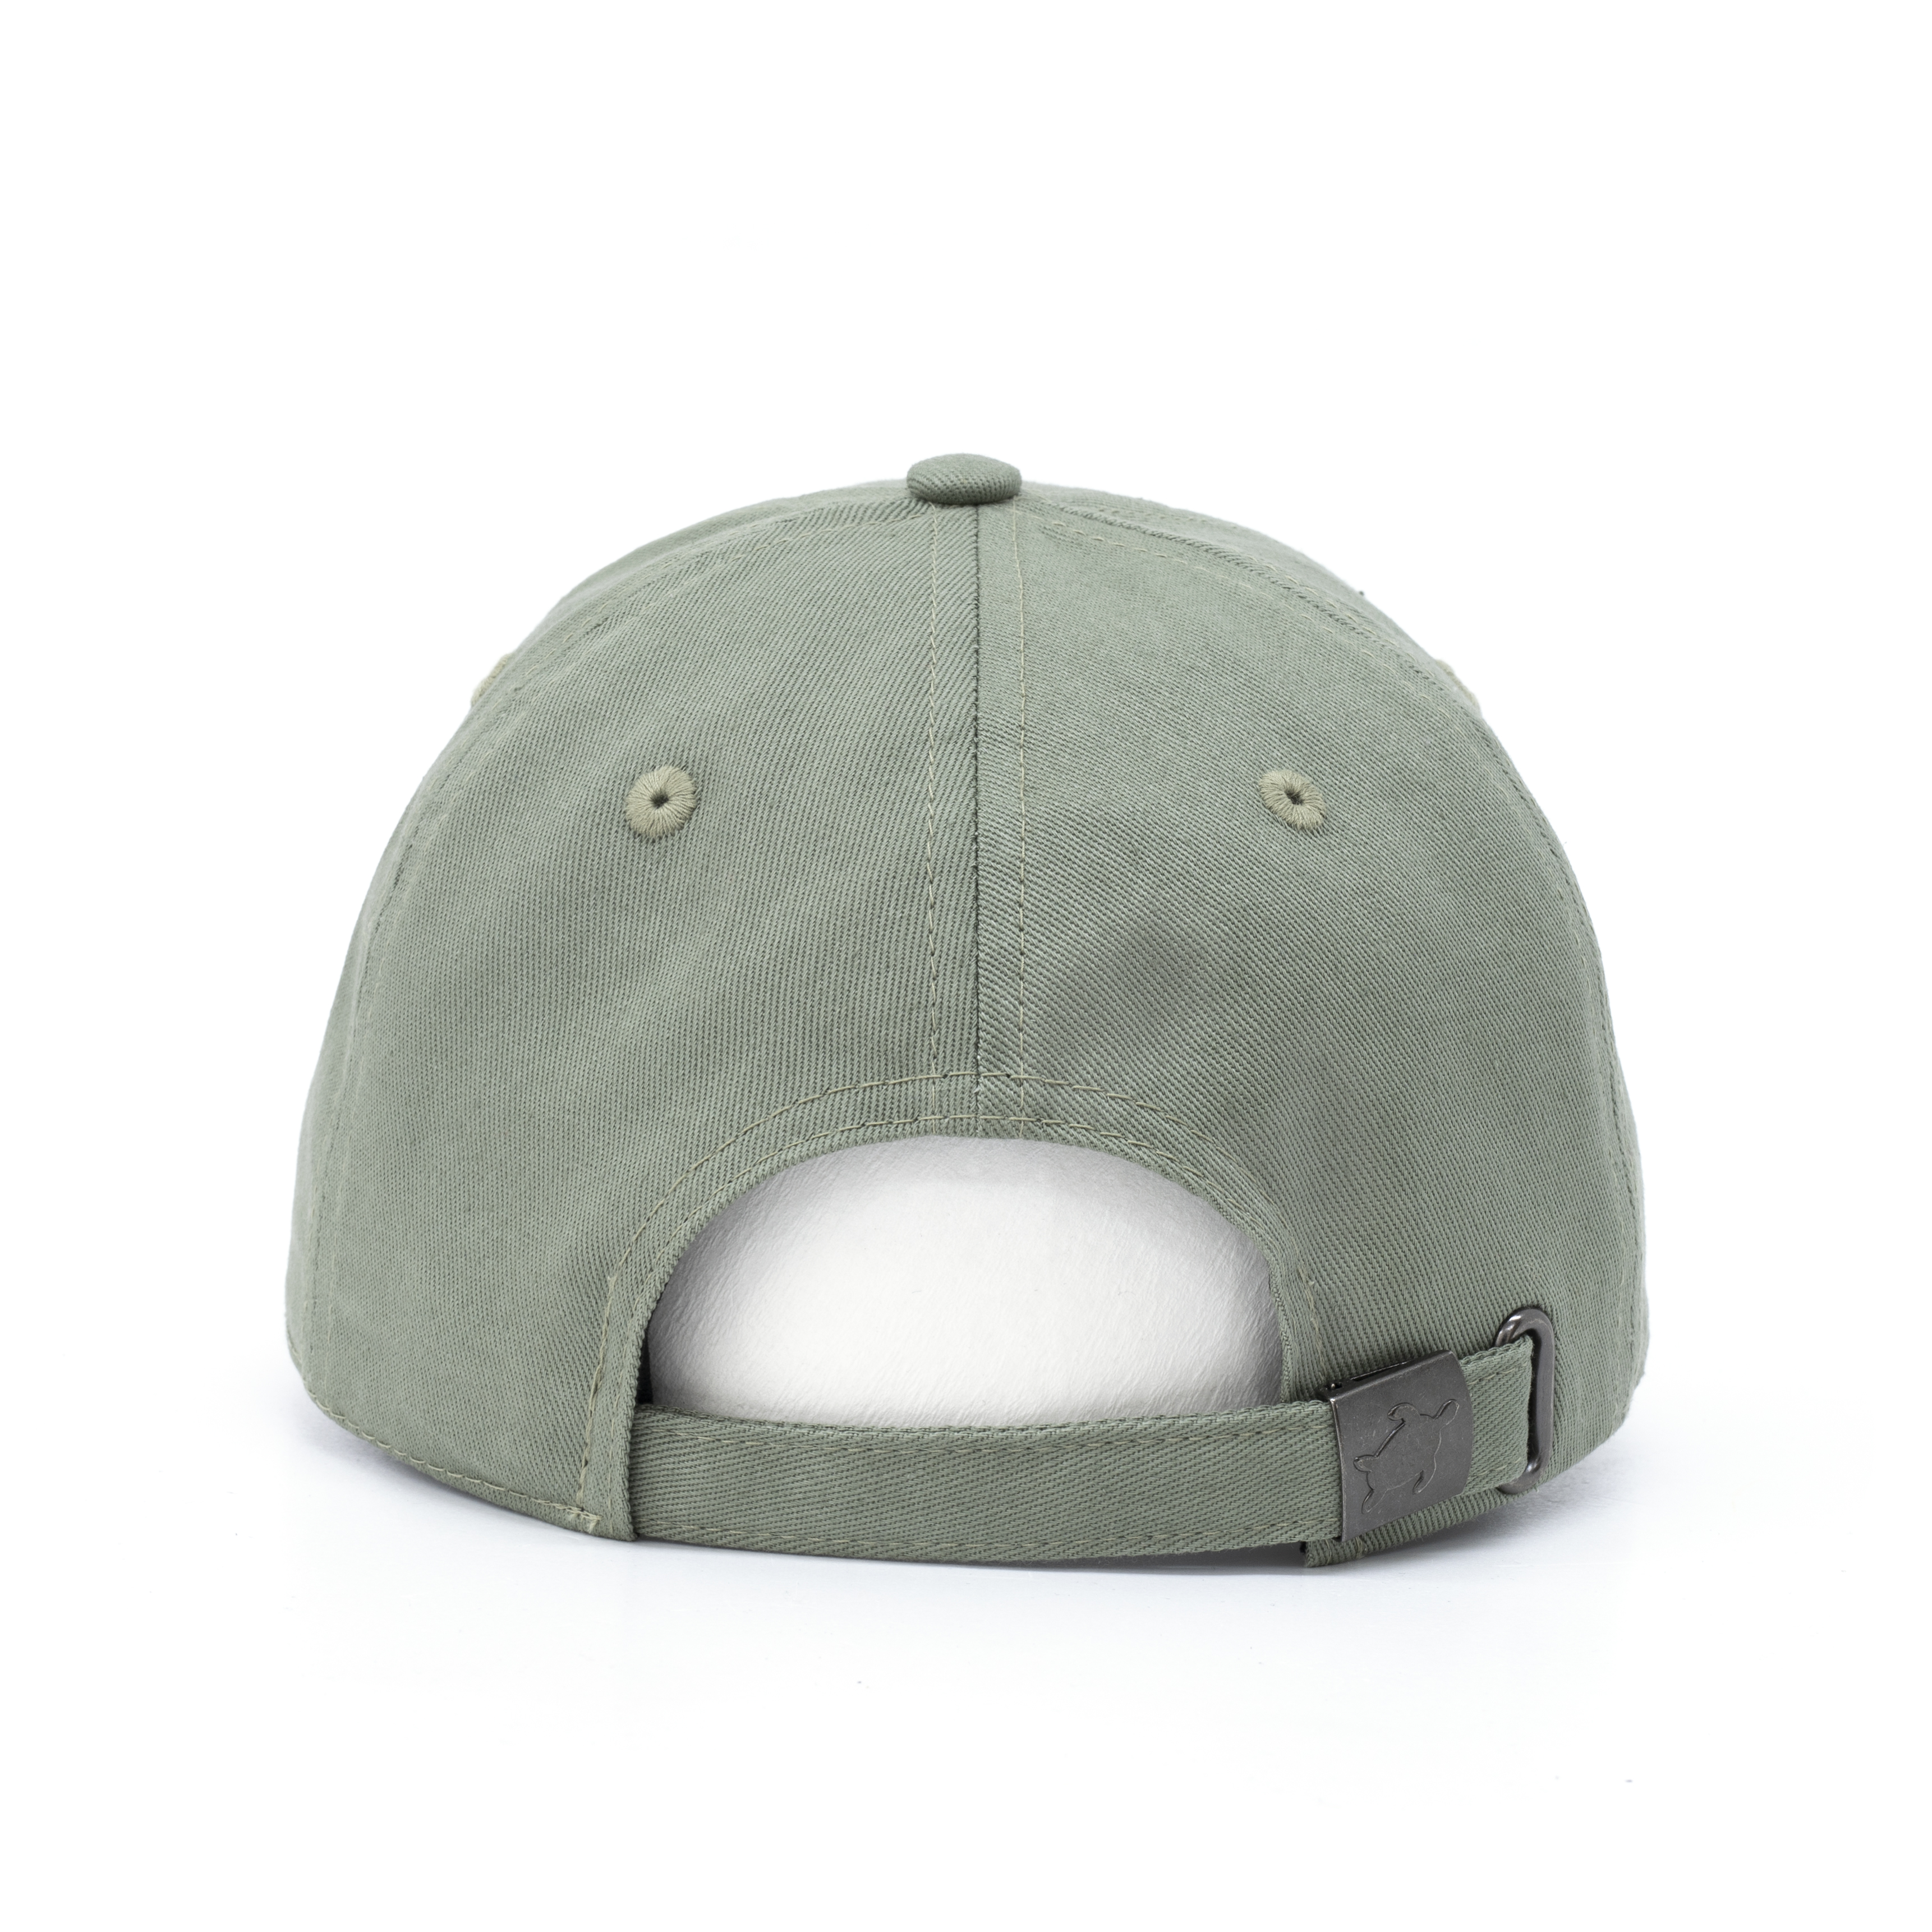 Smith & Miller Reno Unisex Curved Cap, dusty green